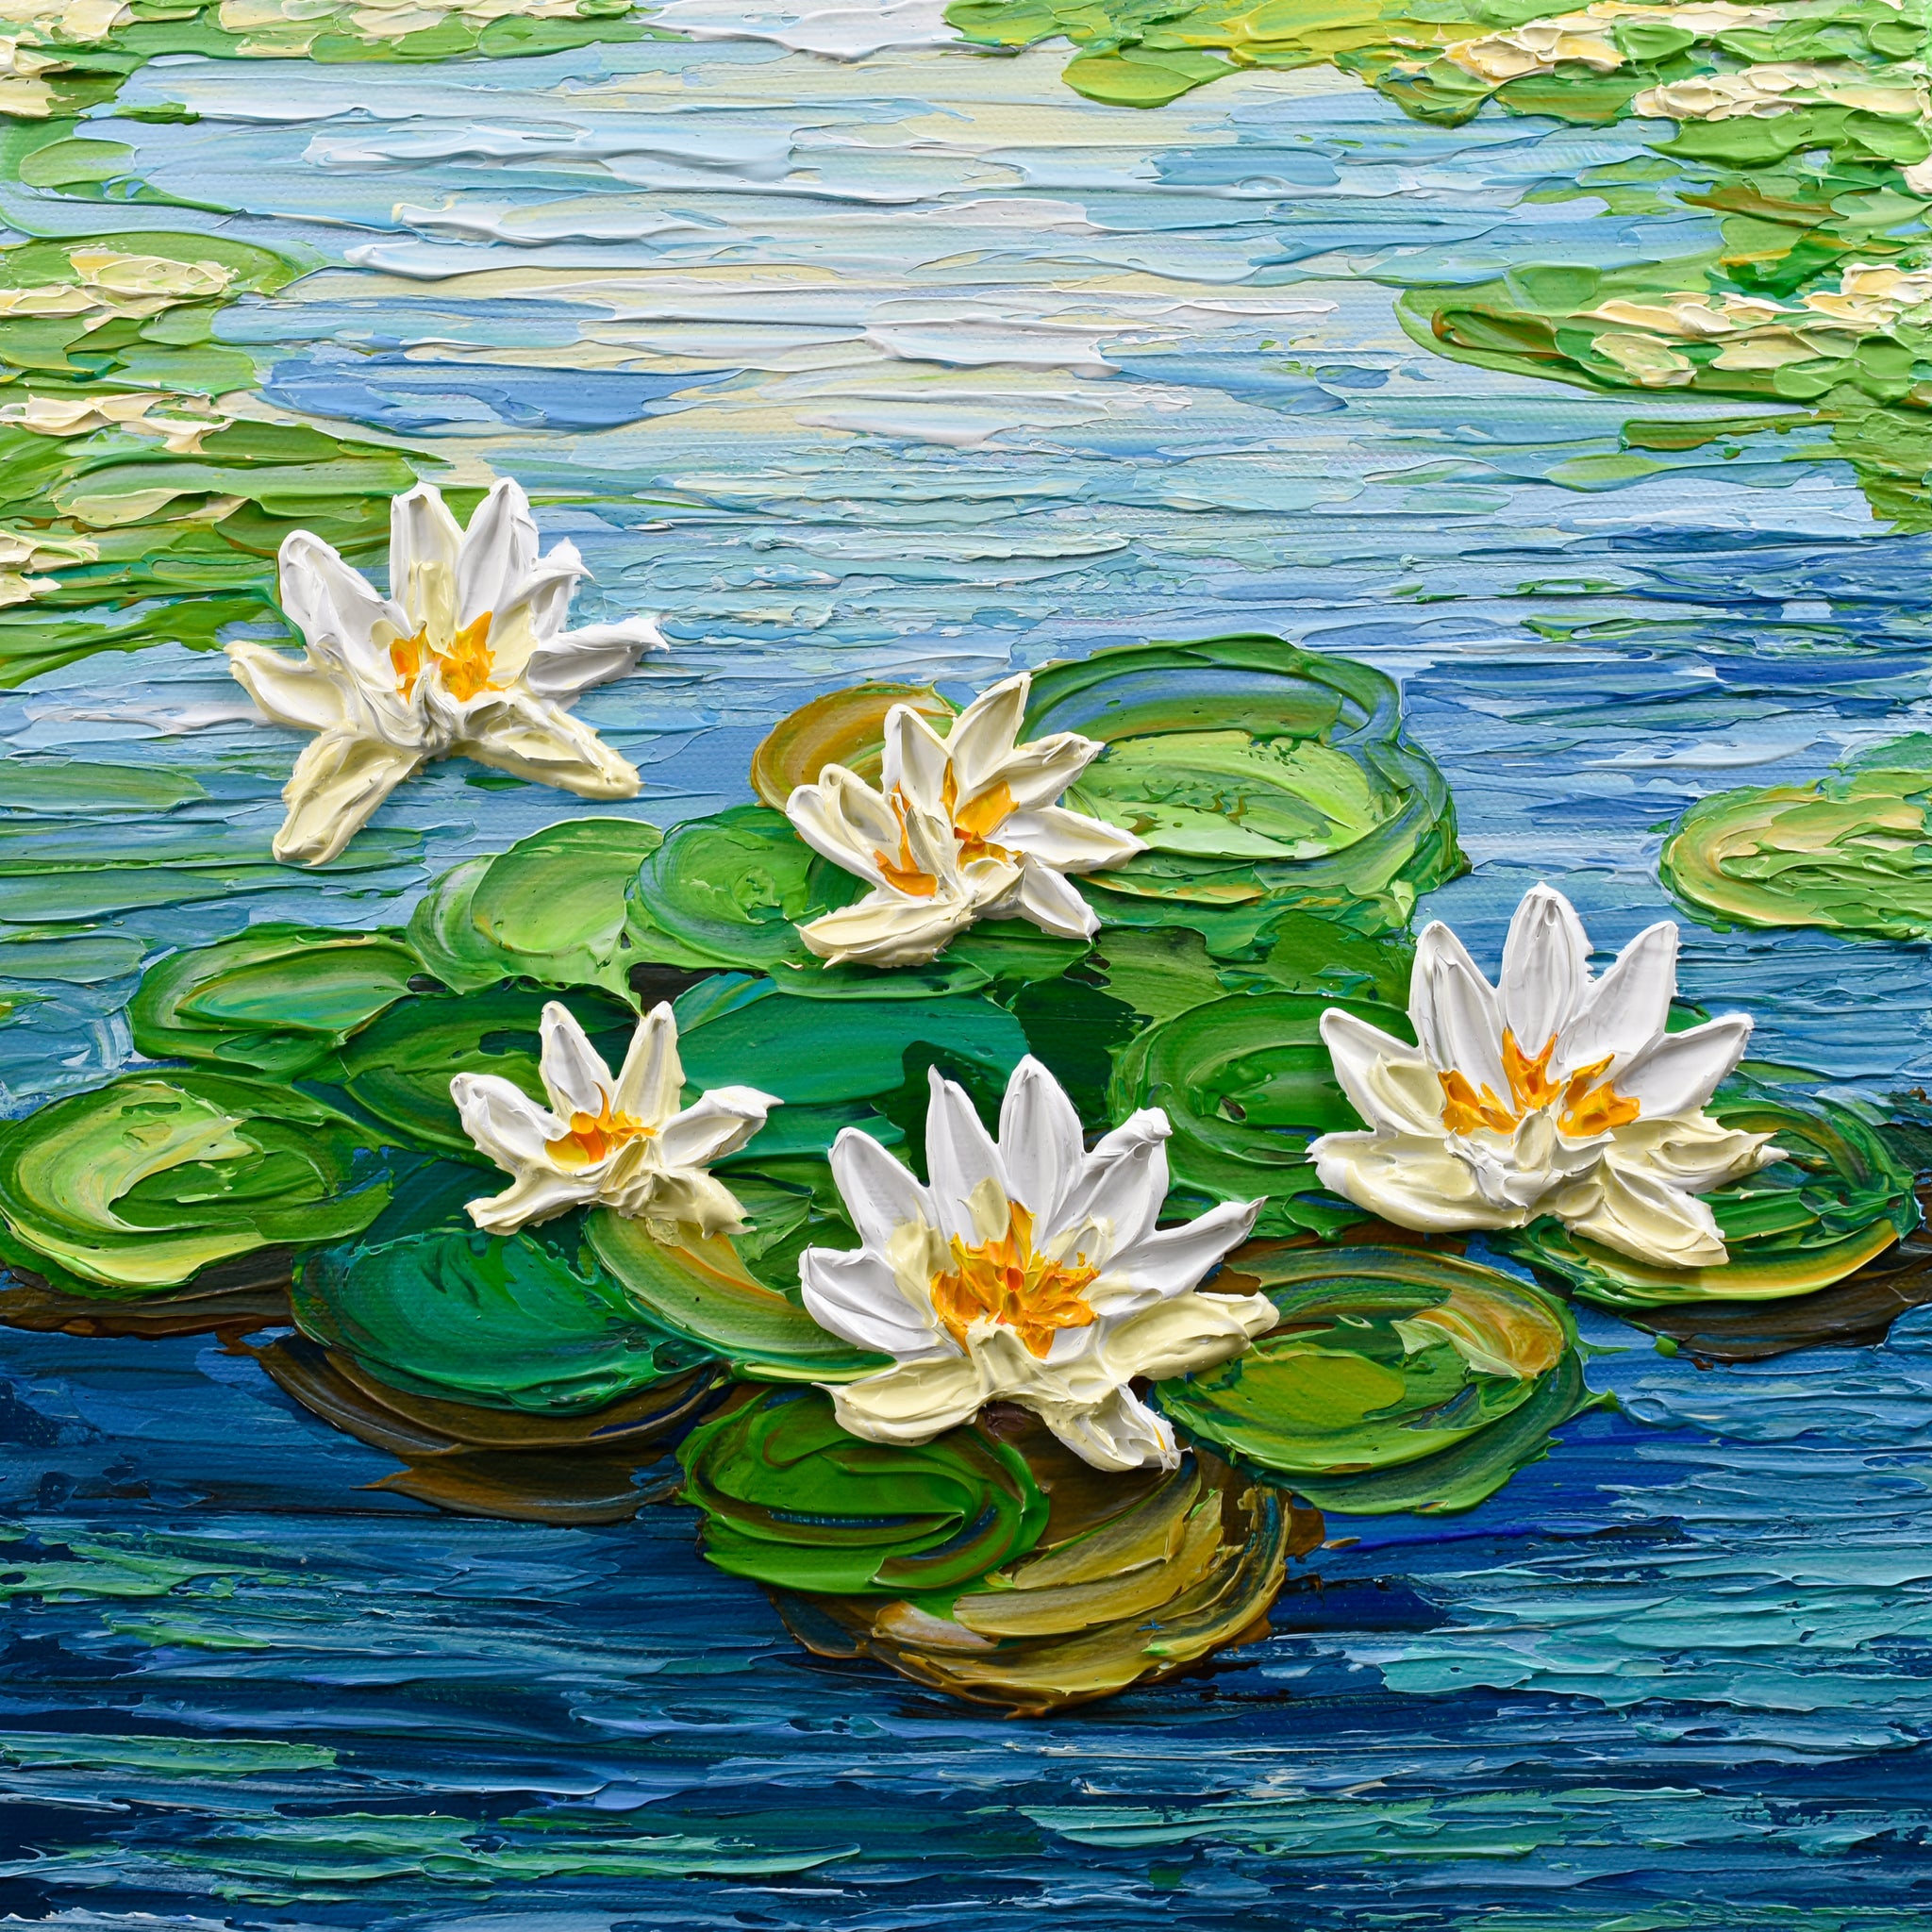 Waterlilies in the morning, Impasto Floral Painting, Acrylic, 12"x12"